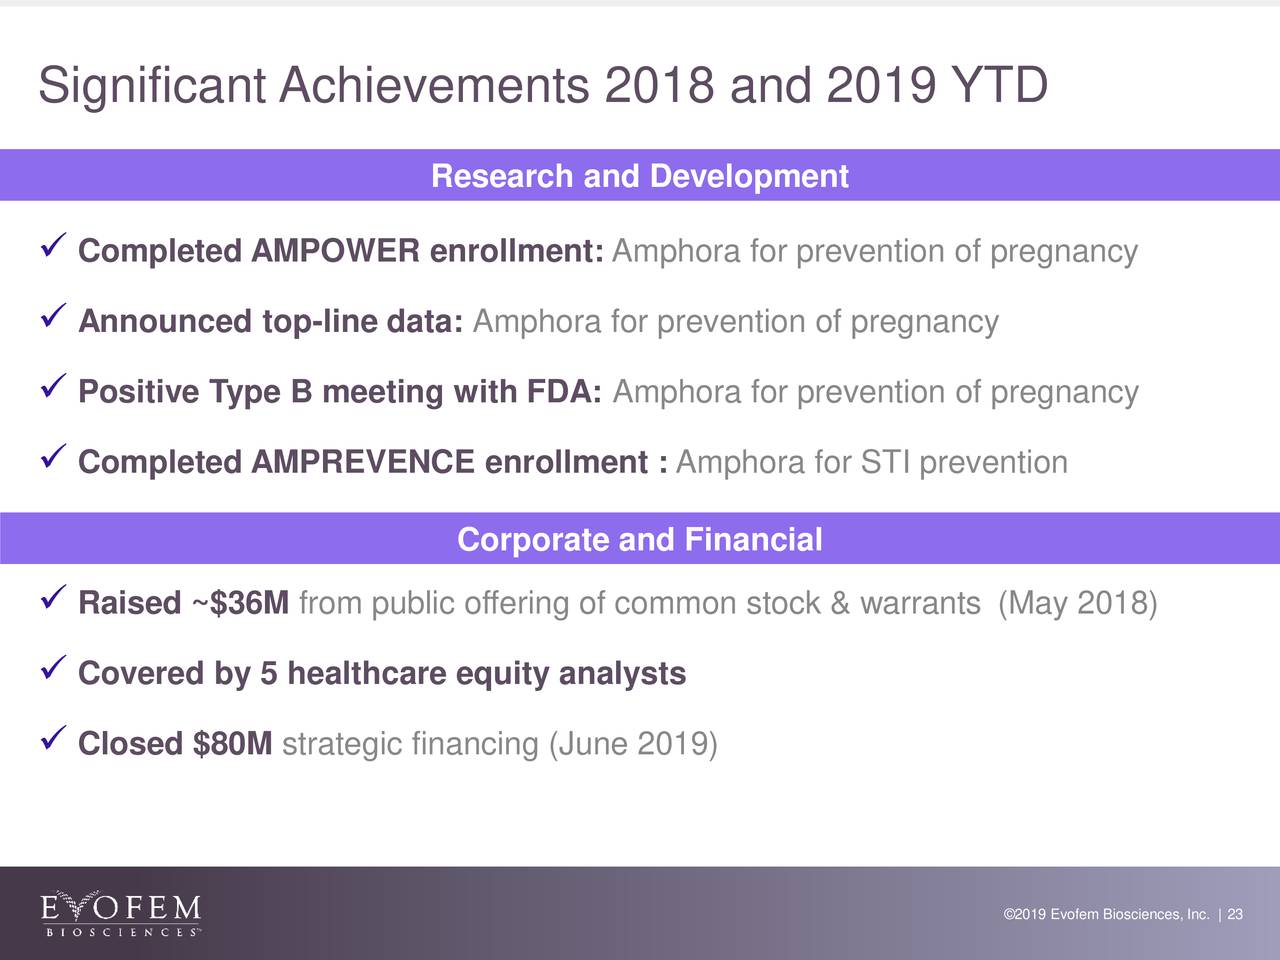 Significant Achievements 2018 and 2019 YTD